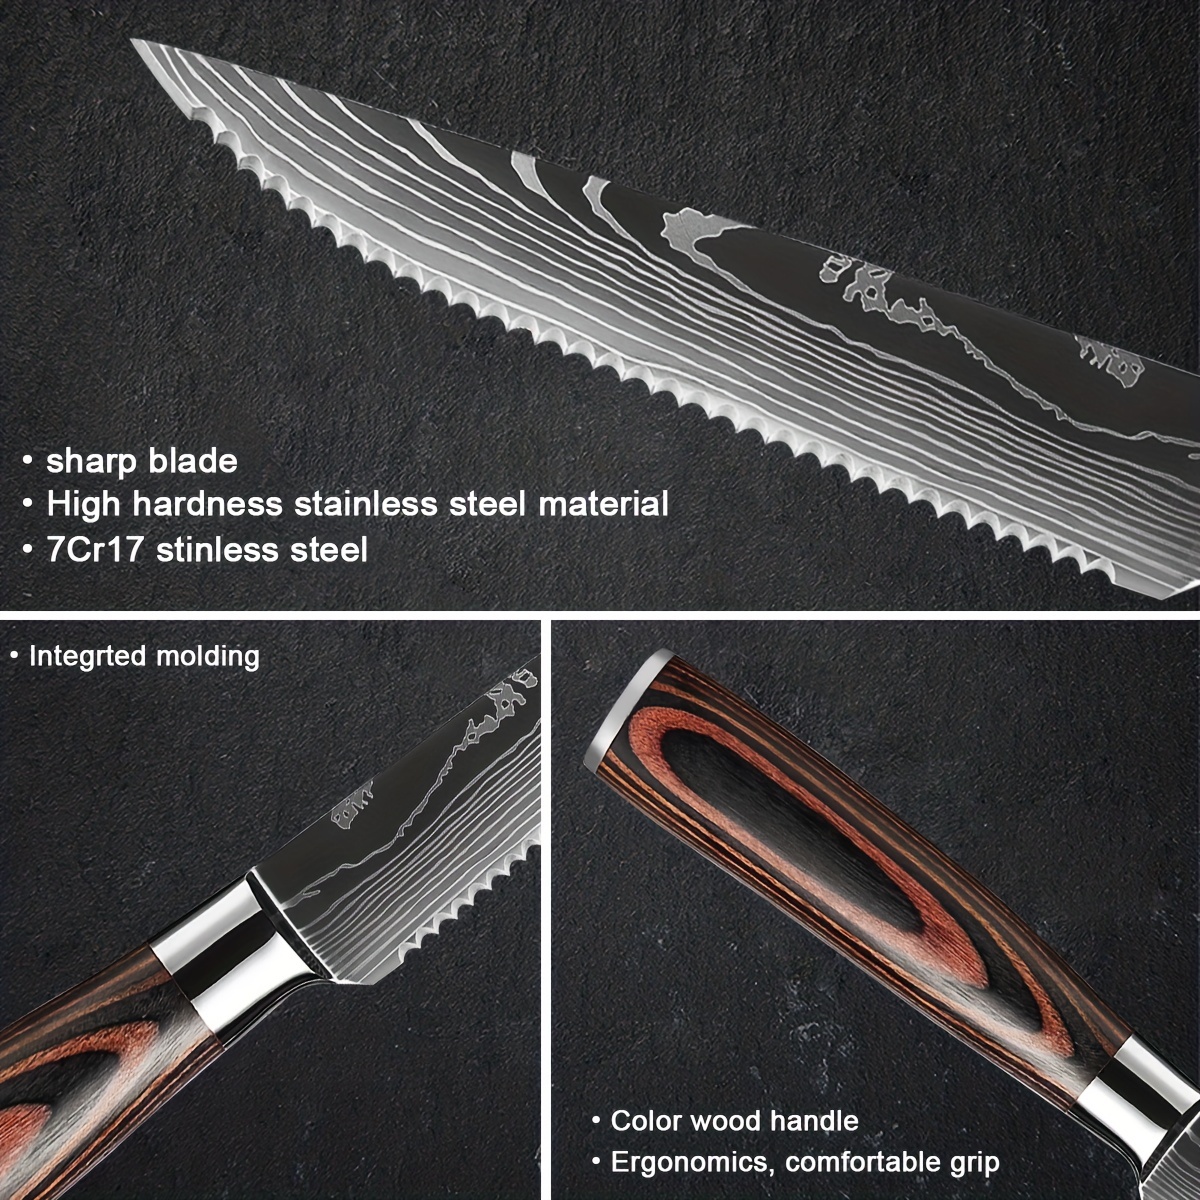 XT XITUO Steak Knives Set of 6 Piece Damascus Patterned Stainless Steel Serrated Knife Wooden Handle Beef Cleaver Multipurpose Restaurant Cutlery